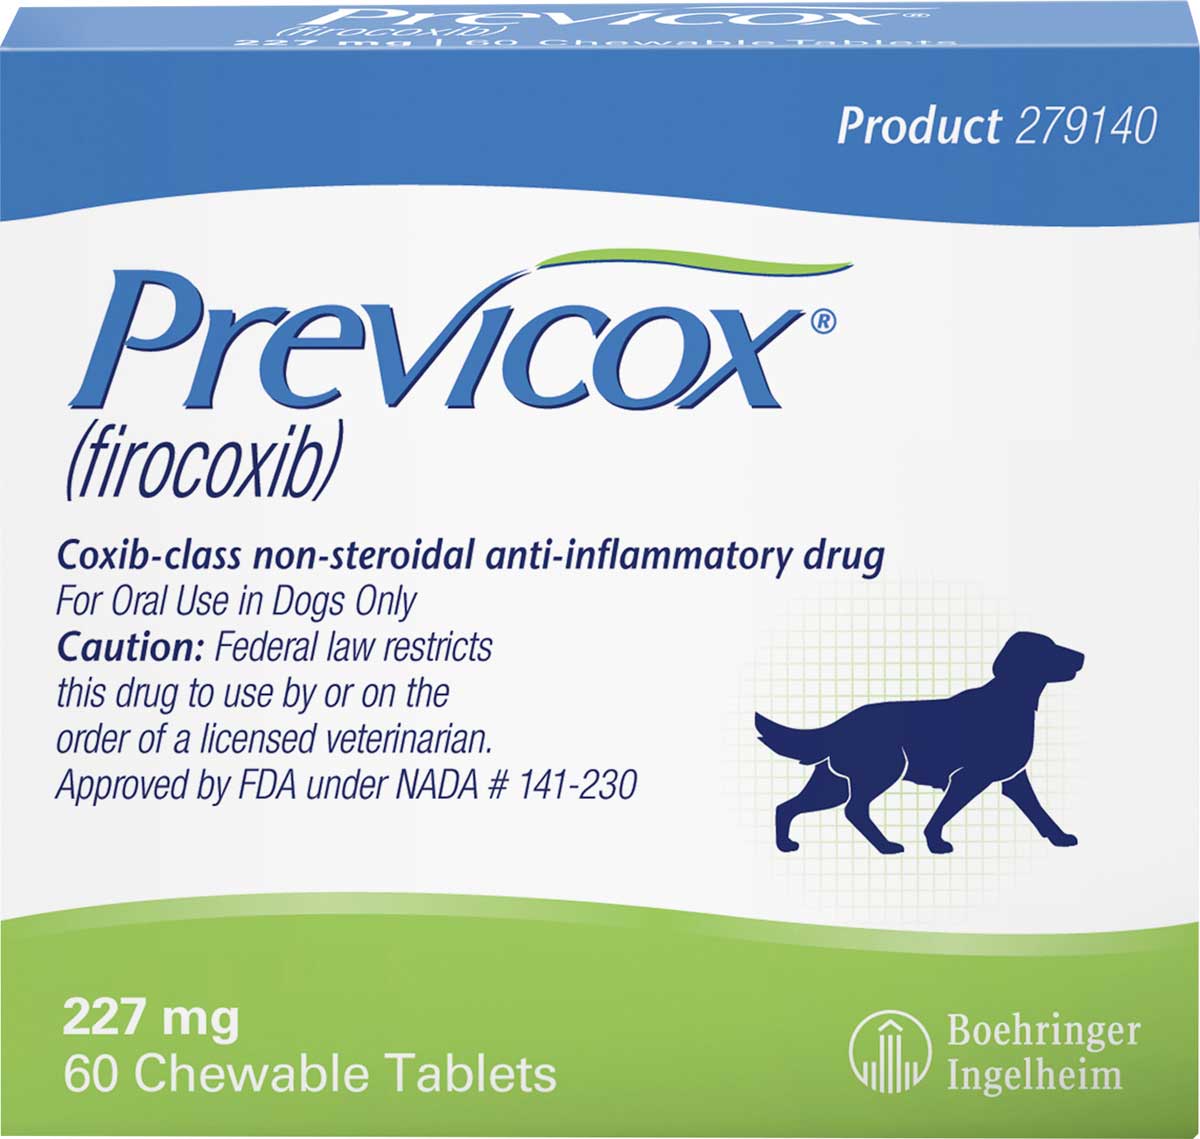 Previcox for Dogs Merial - Safe 